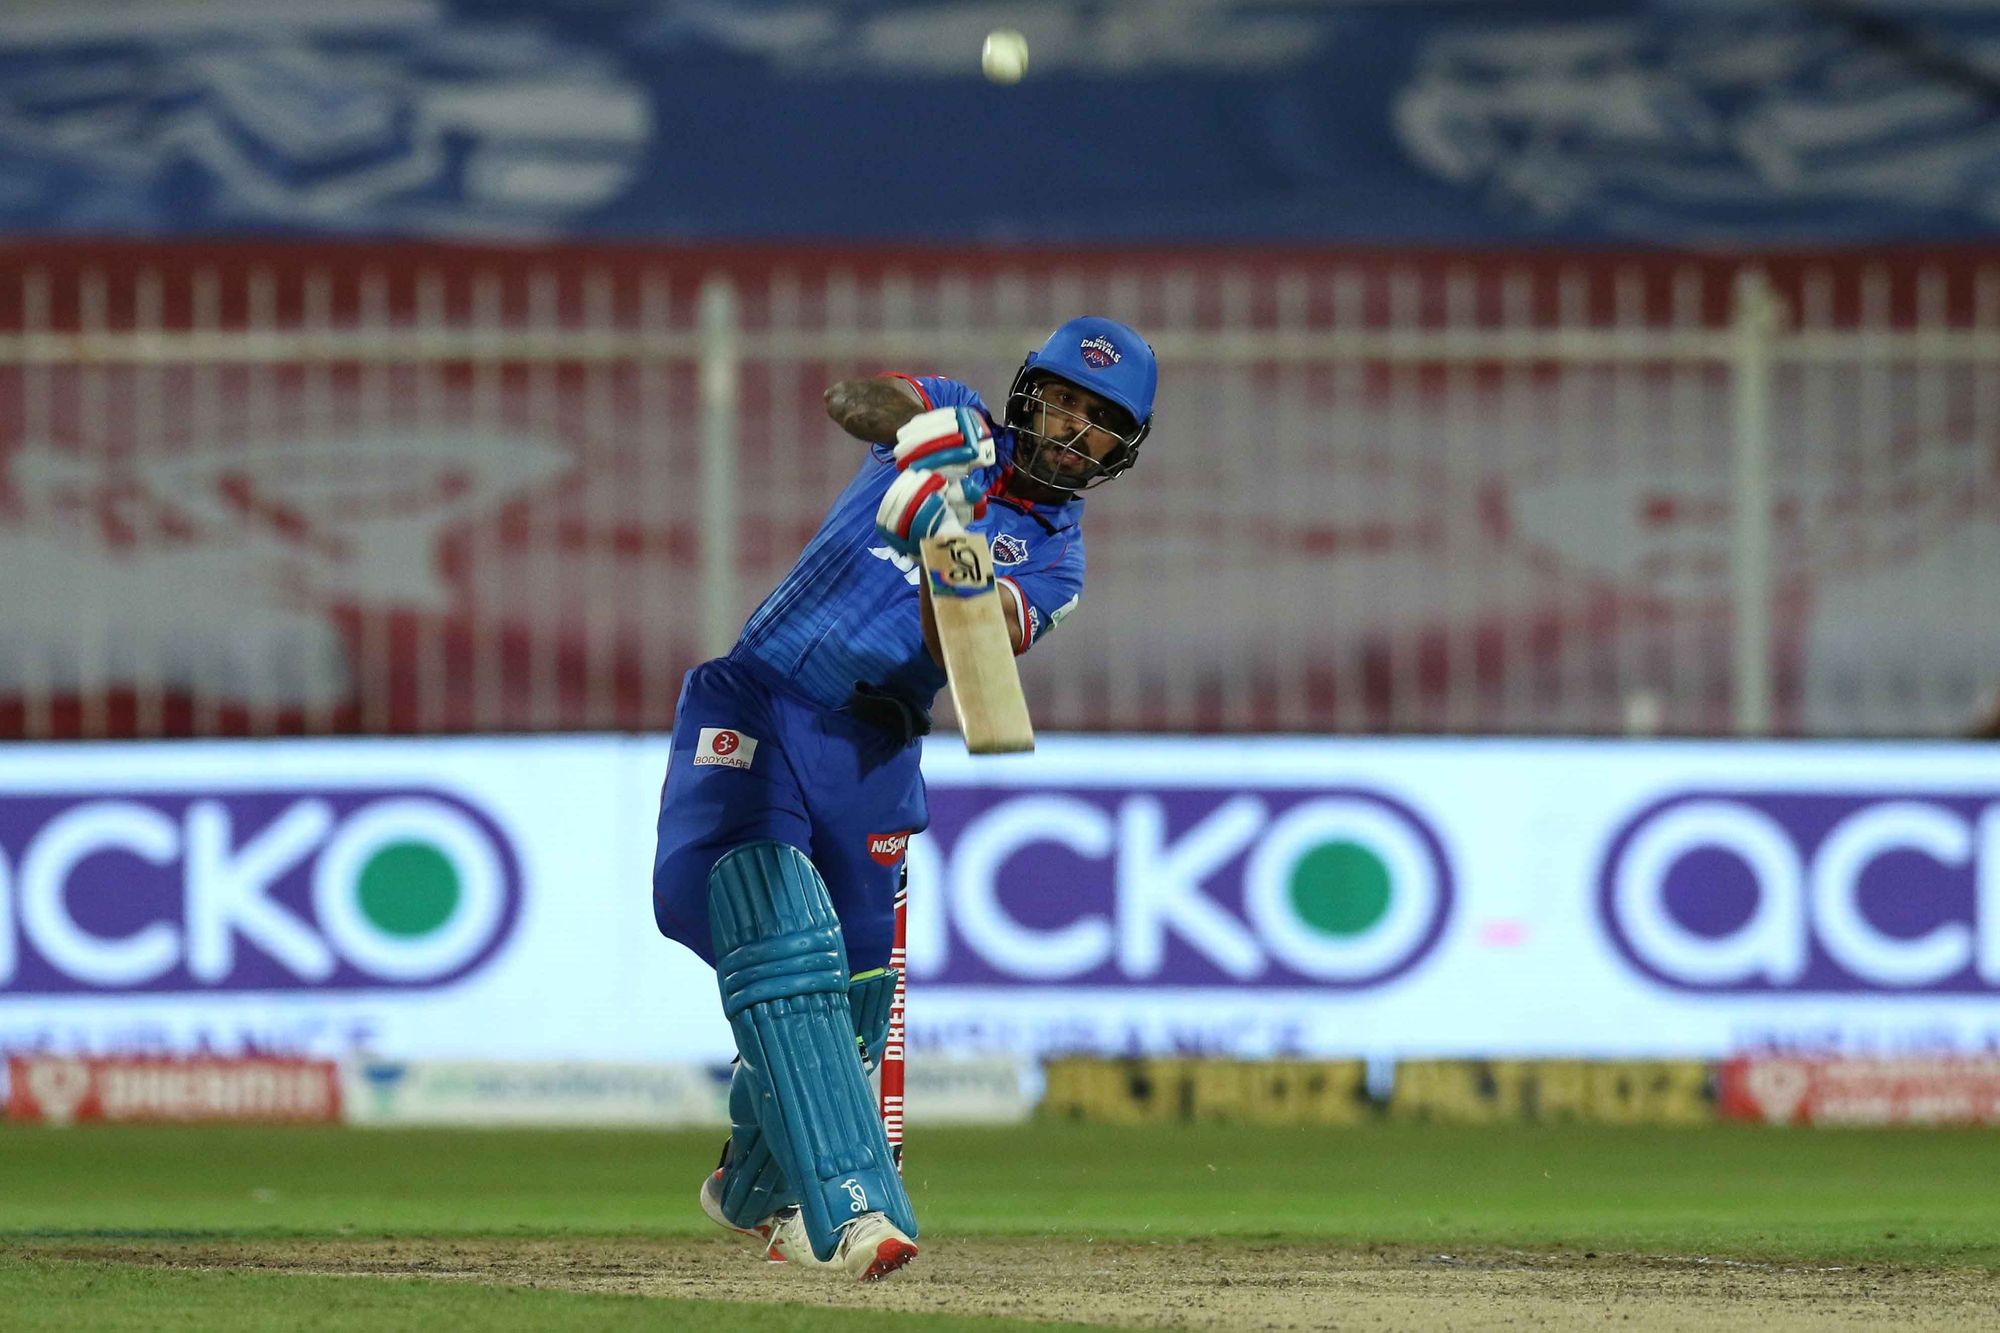 Shikhar Dhawan is the only batsman to score back-to-back hundreds in IPL | BCCI/IPL